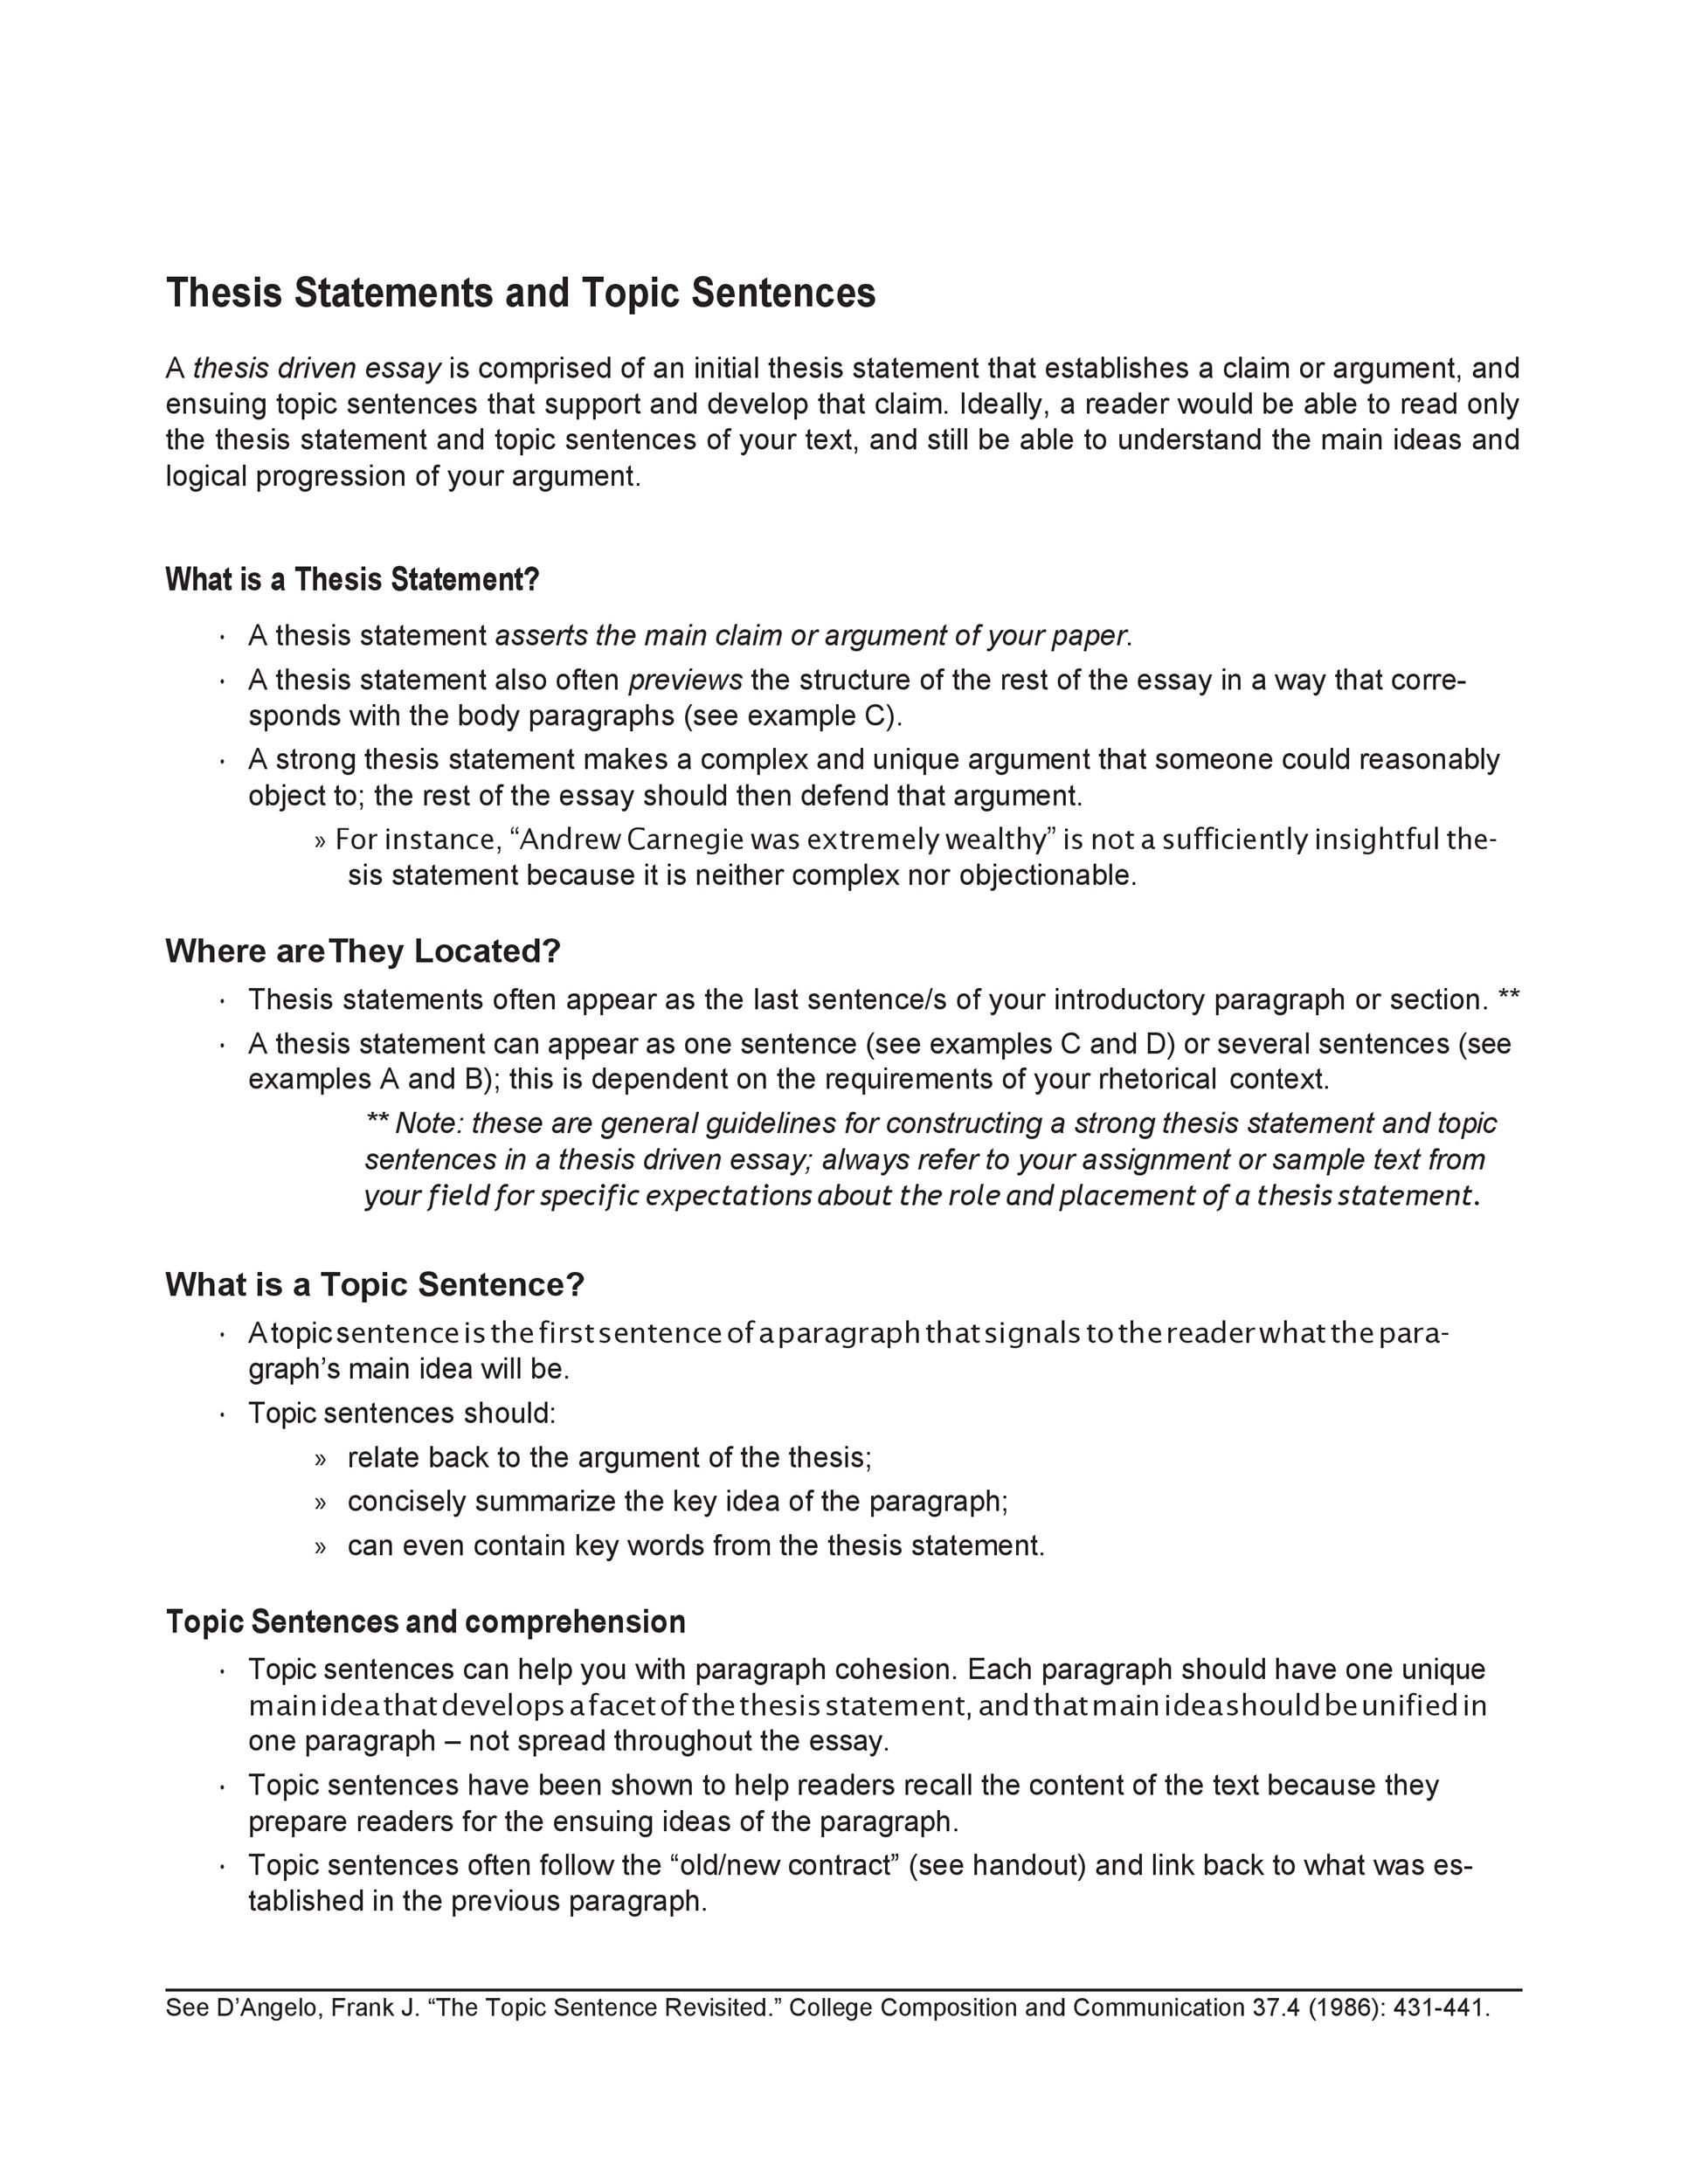 what should a thesis statement contain